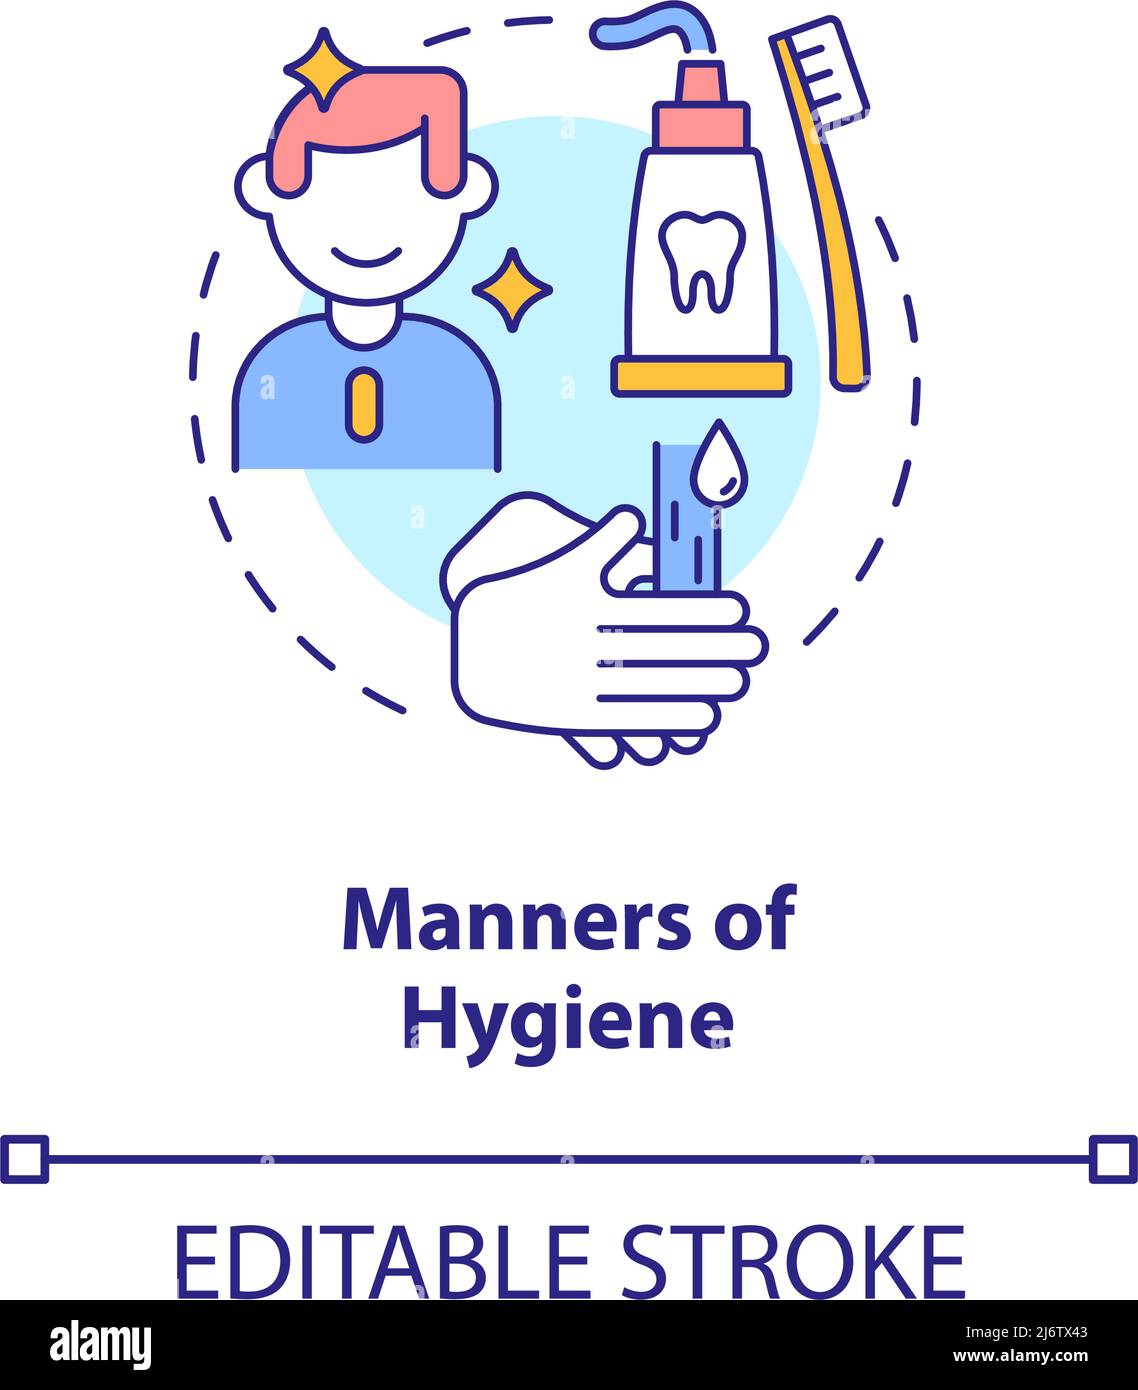 Manners of hygiene concept icon Stock Vector